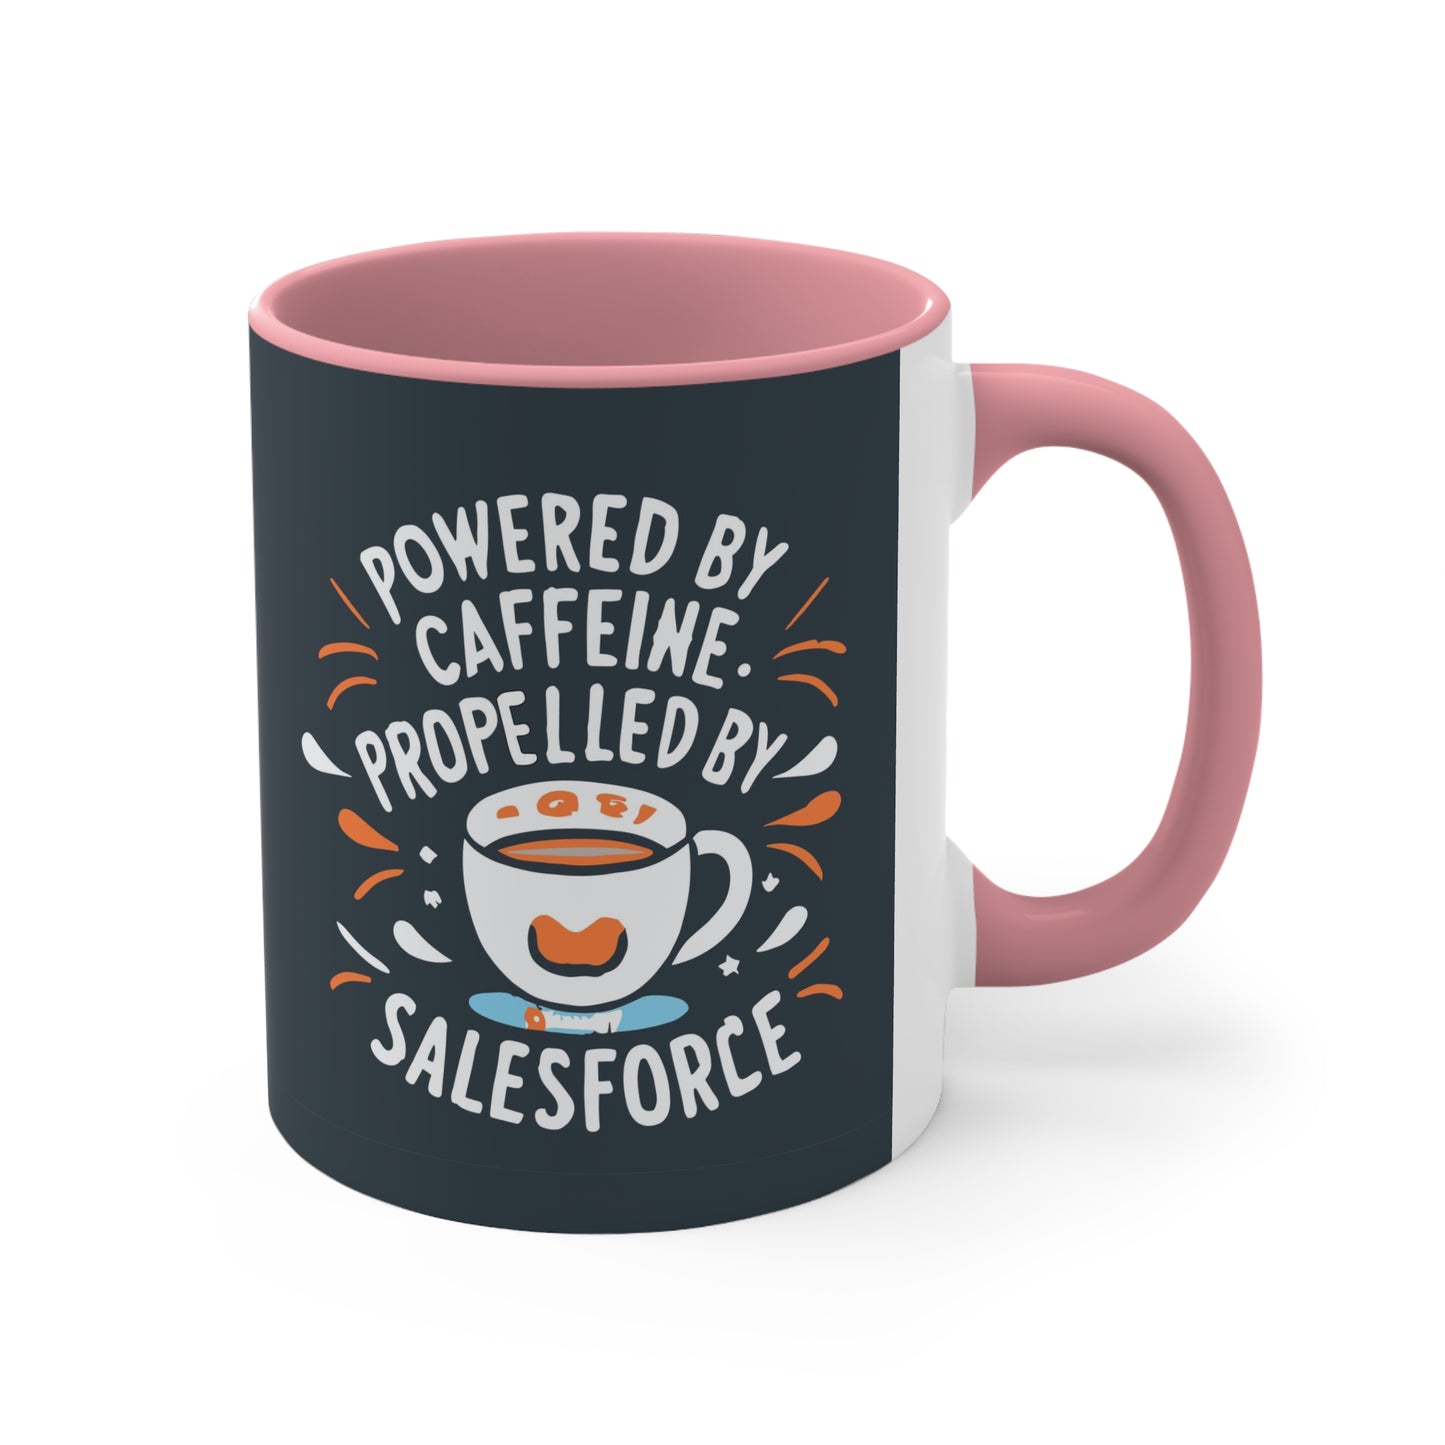 Powered by caffeine, propelled by Salesforce